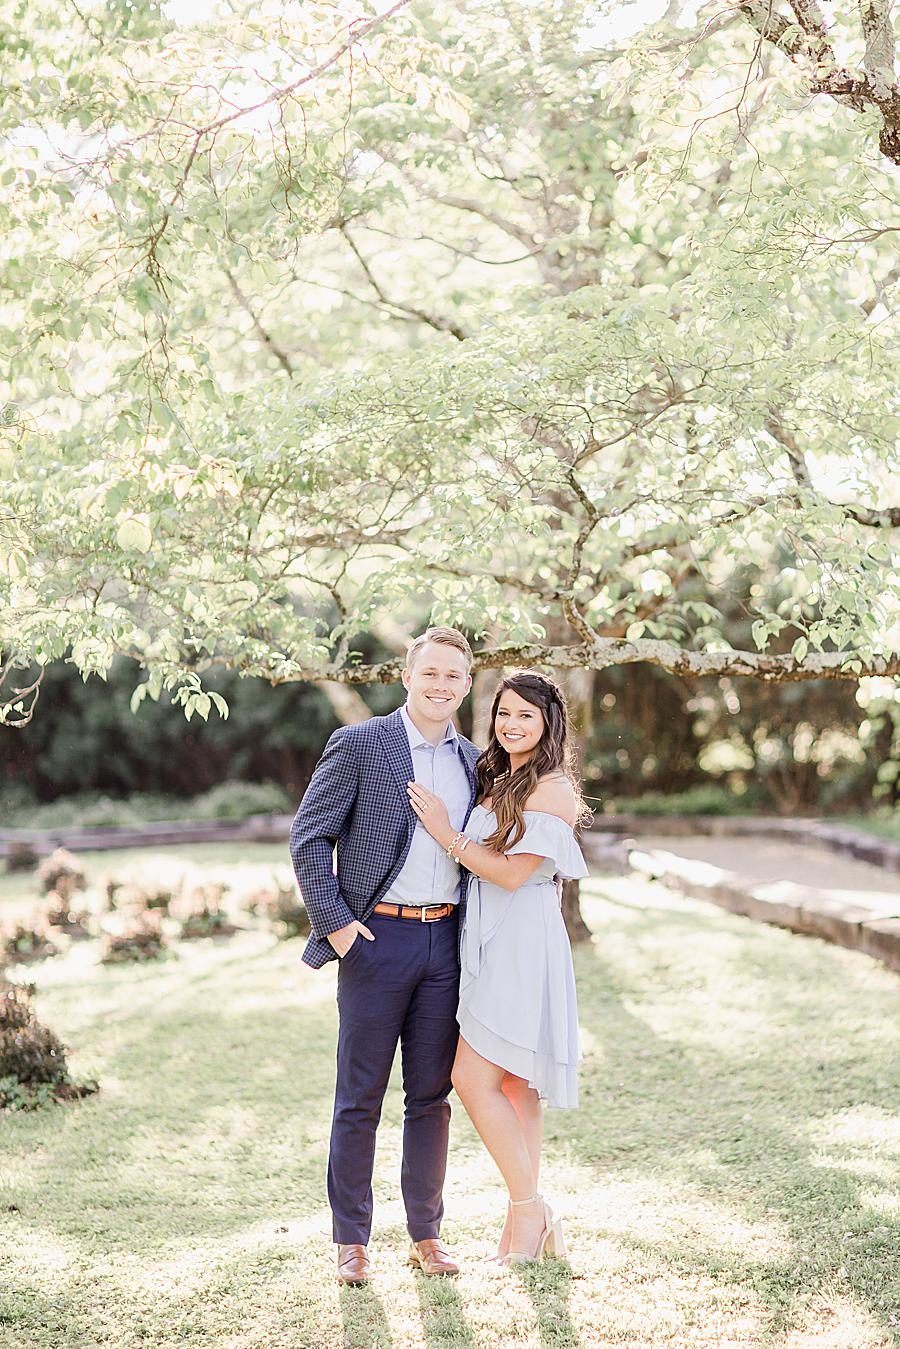 High low dress at this Baxter Gardens Portraits by Knoxville Wedding Photographer, Amanda May Photos.